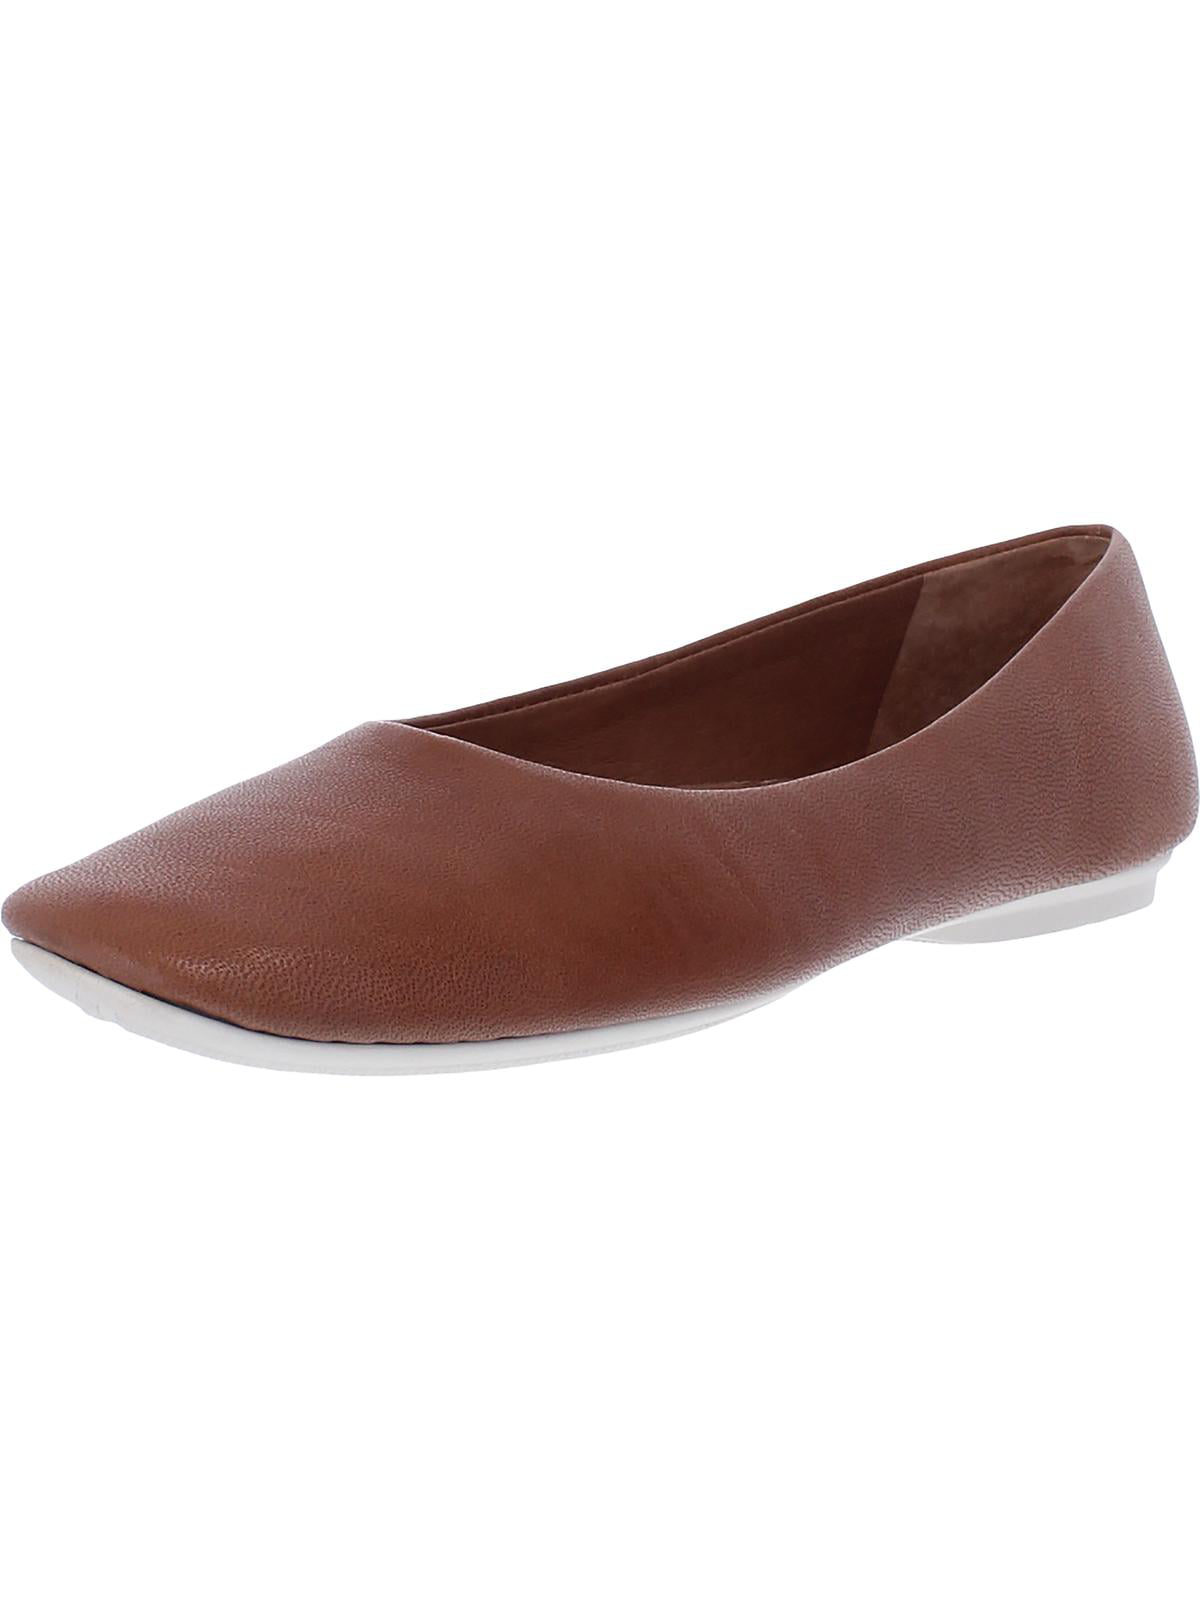 Gentle Souls by Kenneth Cole Womens Eugene Travel Leather Ballet Flats ...